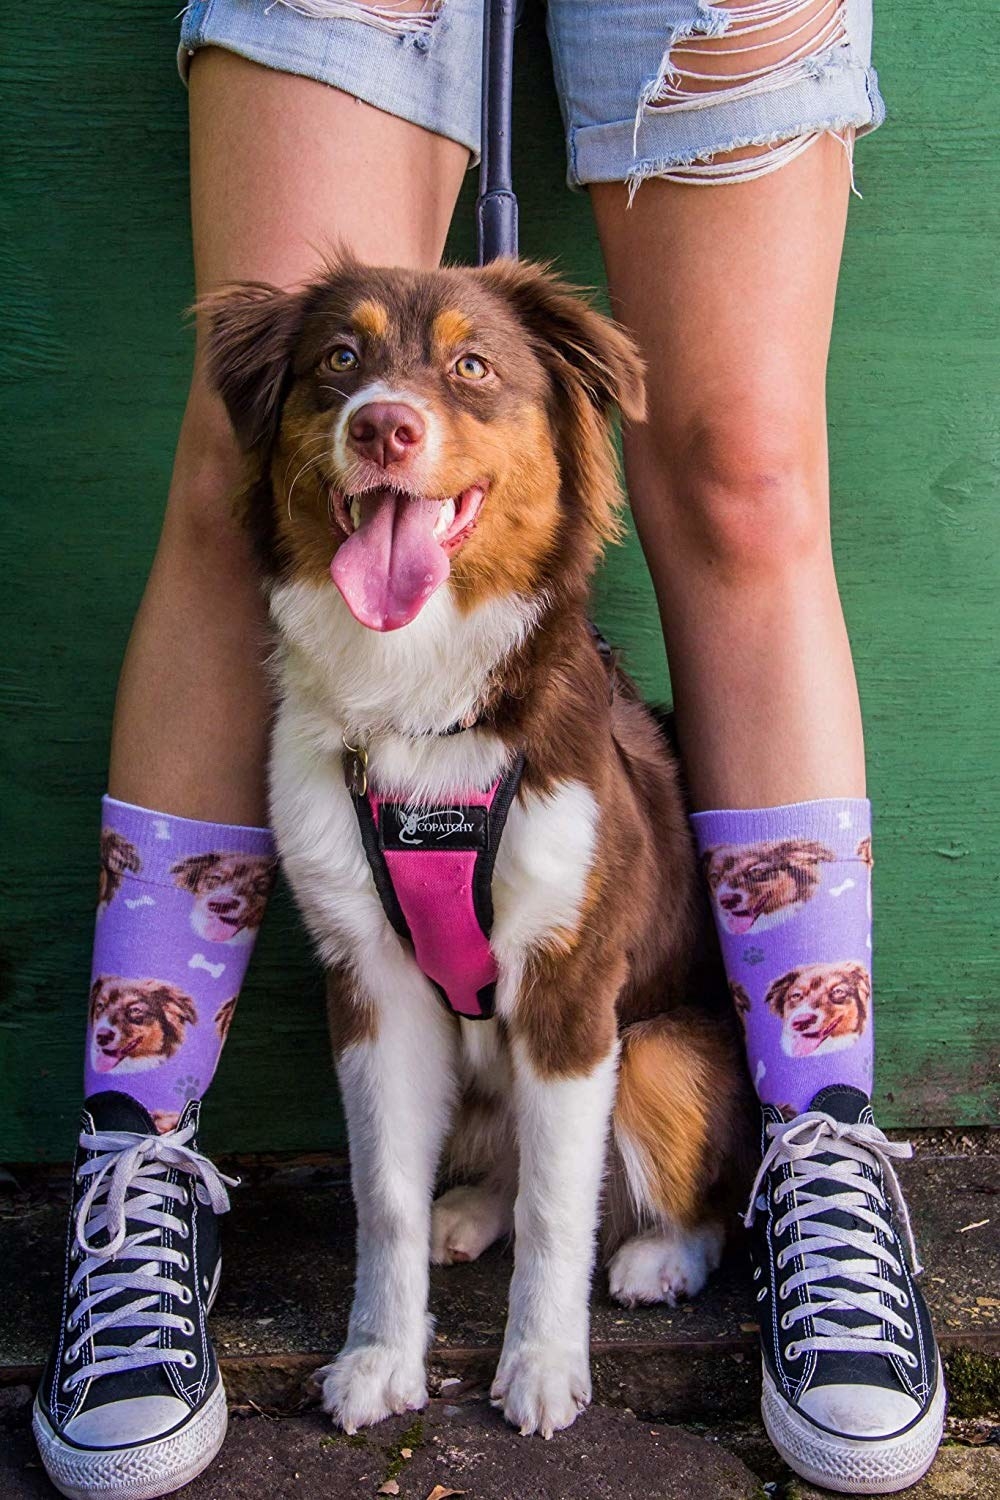 dog next to socks that have its face as a pattern on them 